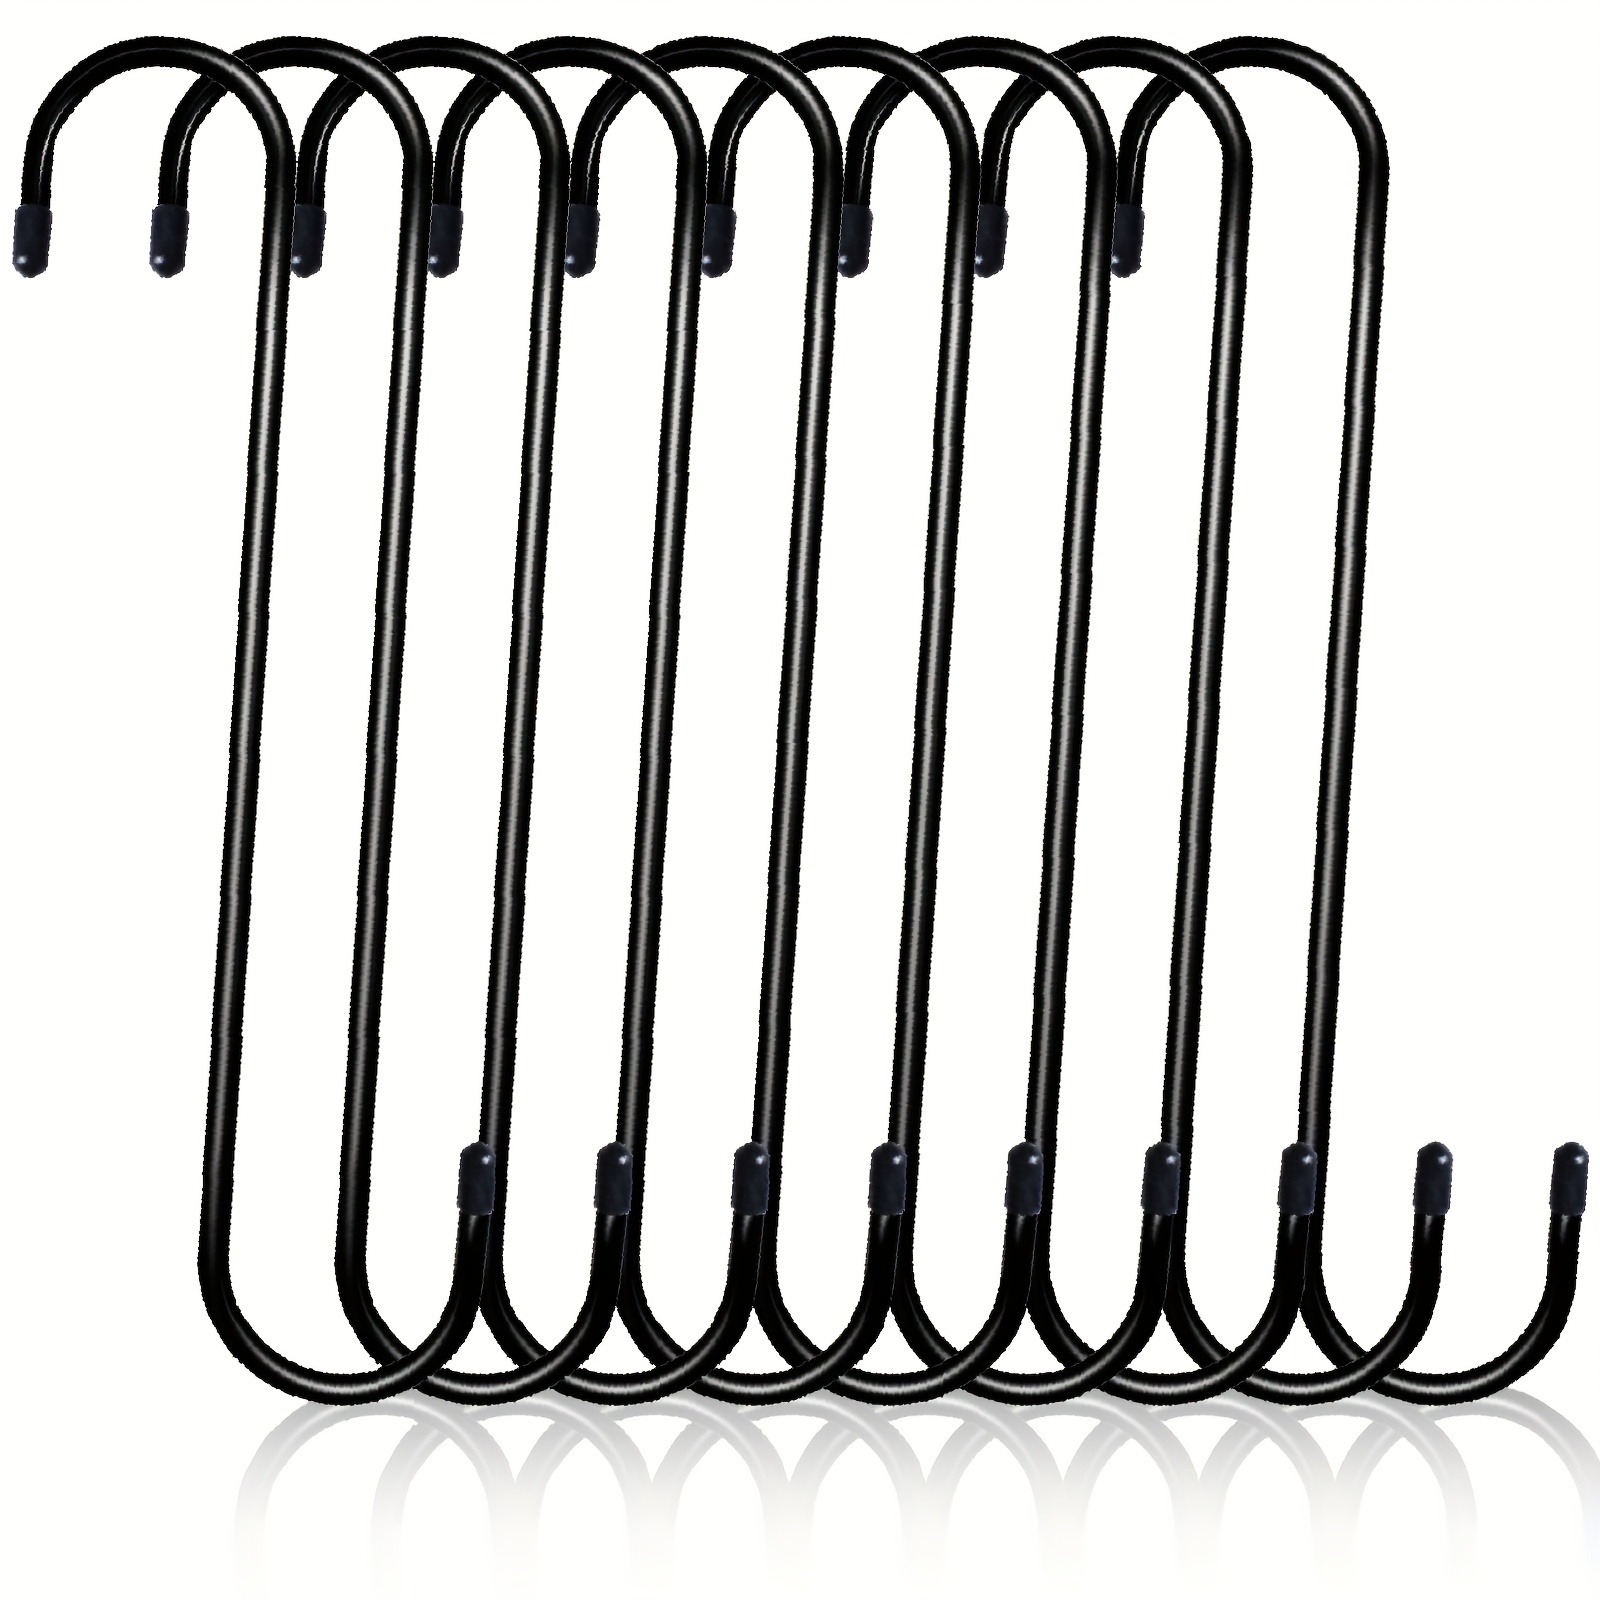 20 Pack 4 Inch Heavy Duty S Hooks for Hanging Pots Pans Plants